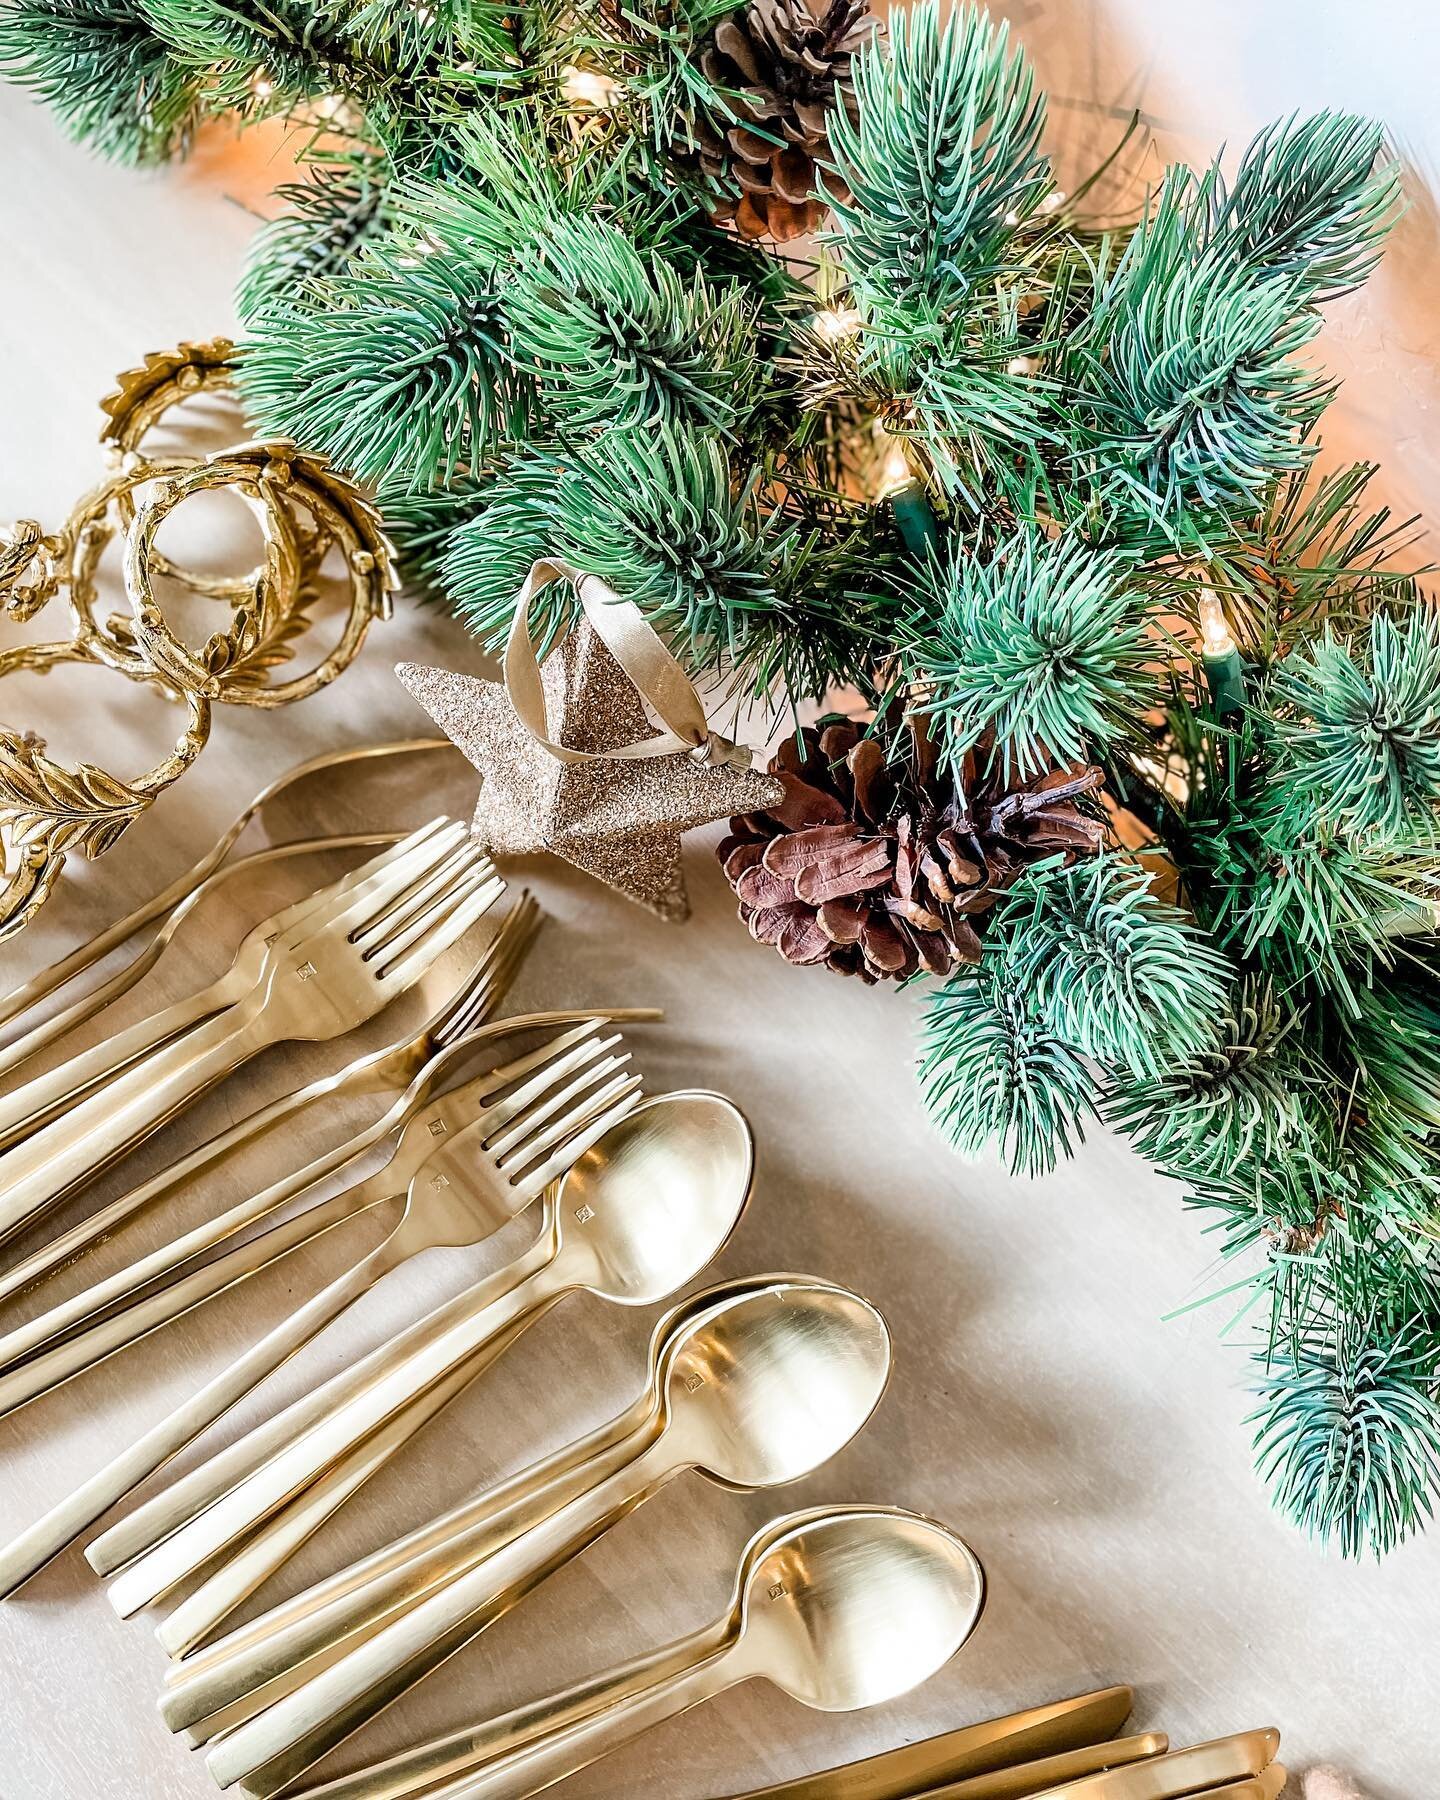 Prepping for NYE with remnants of Christmas still around....

Have you packed up Christmas or are you an after NYE type? 

#nye2020 #hello2021 #gold #dinepretty
#afinefeteboise #afinefeteidaho